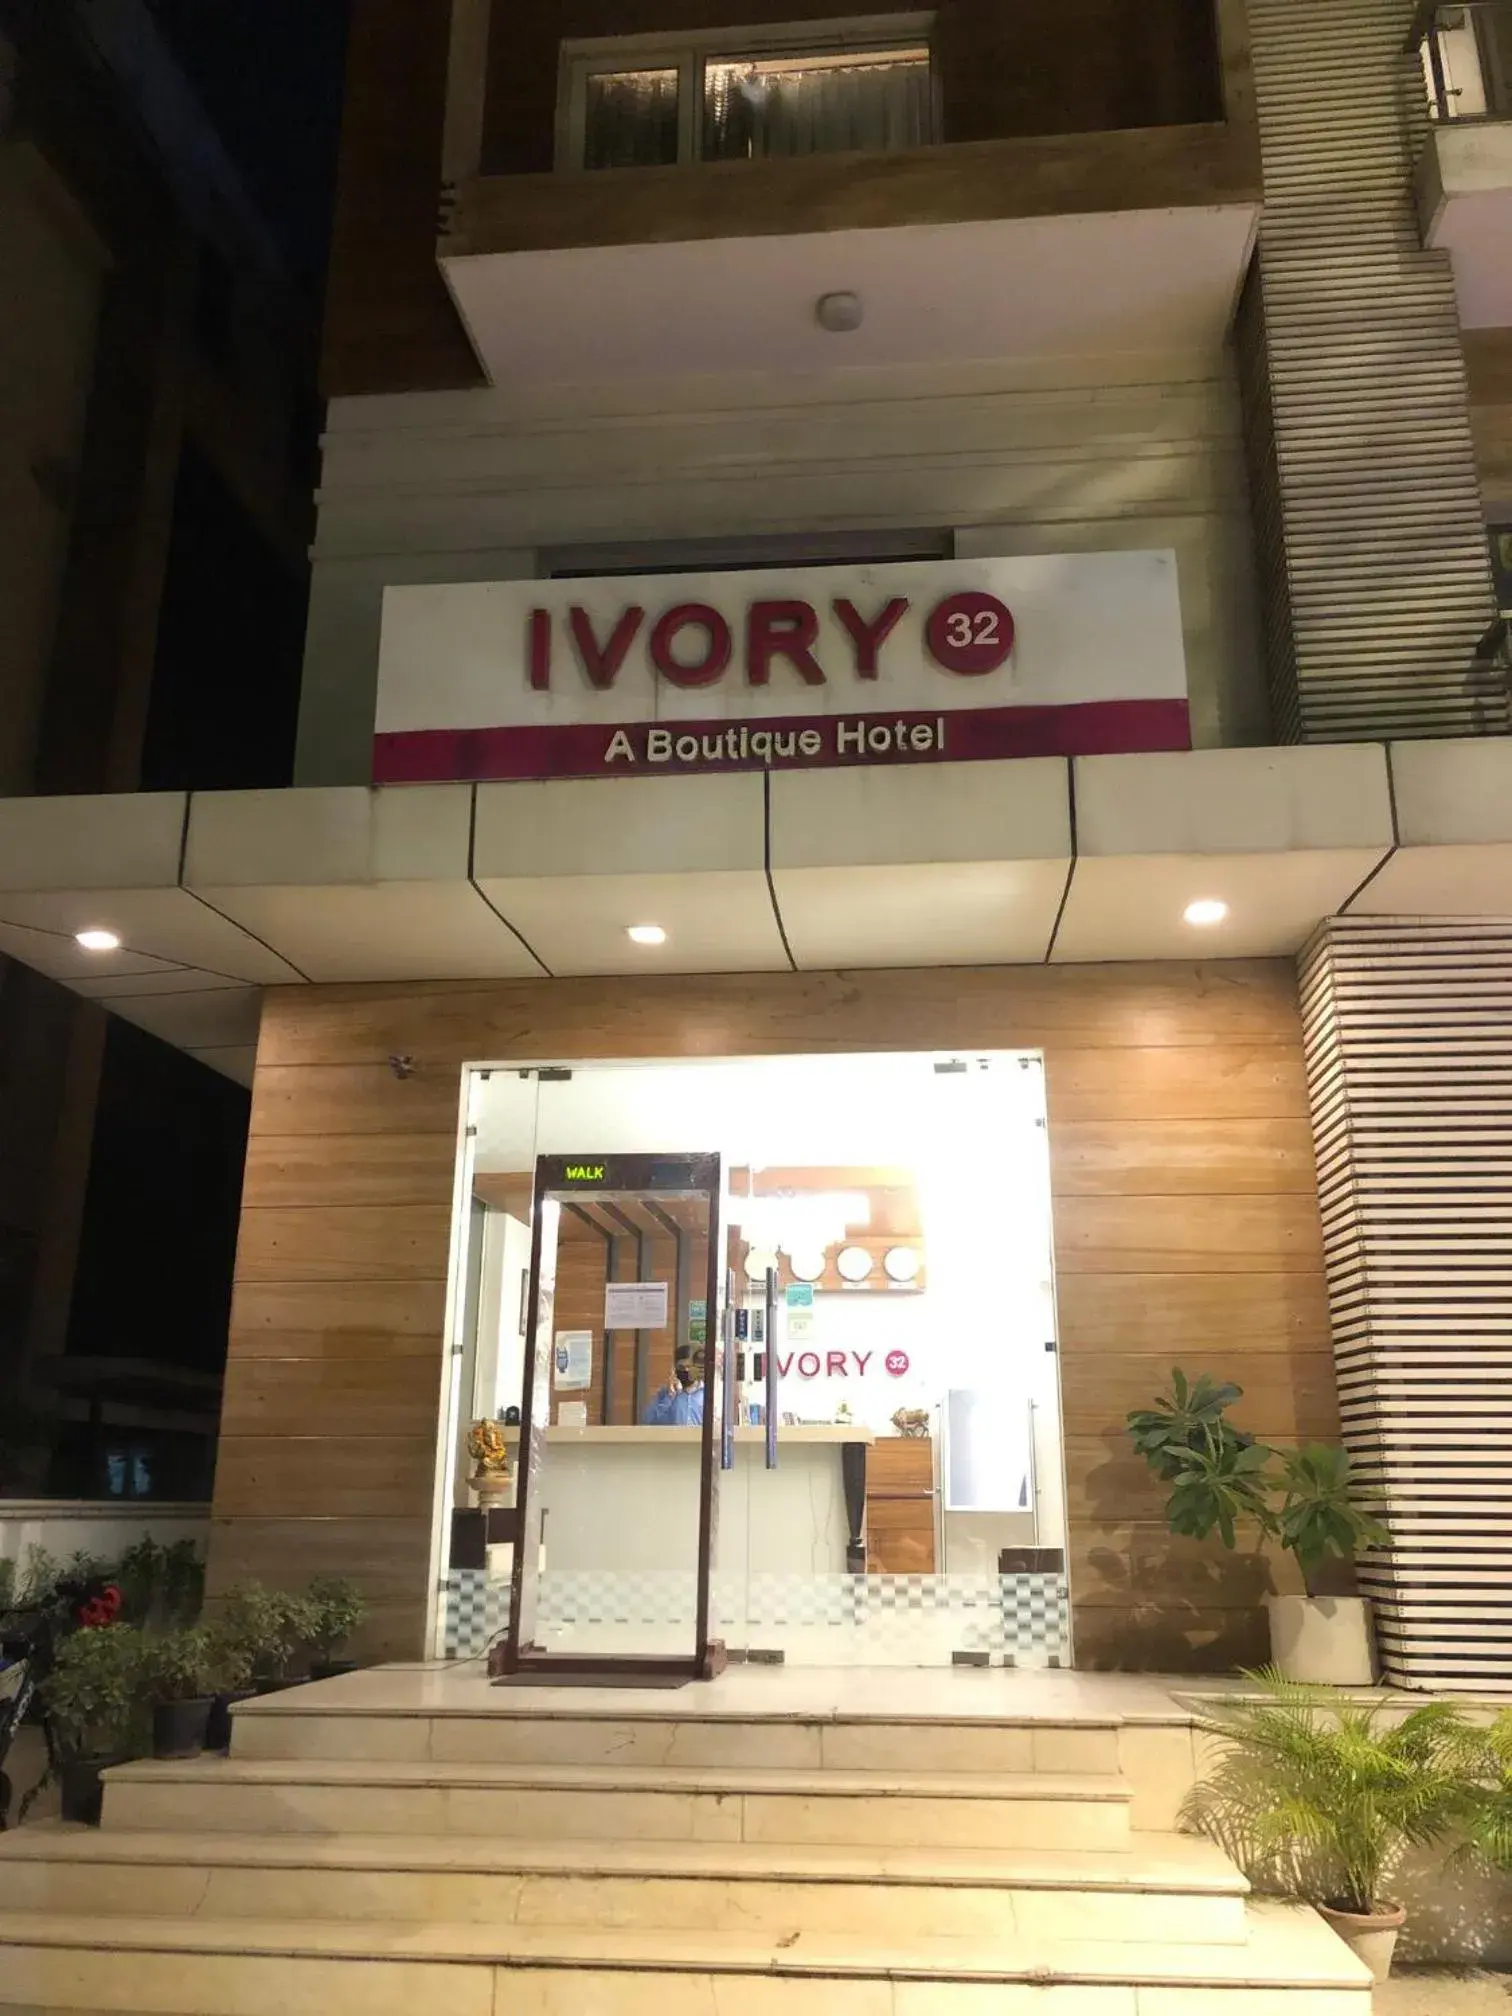 Property building in Hotel Ivory 32